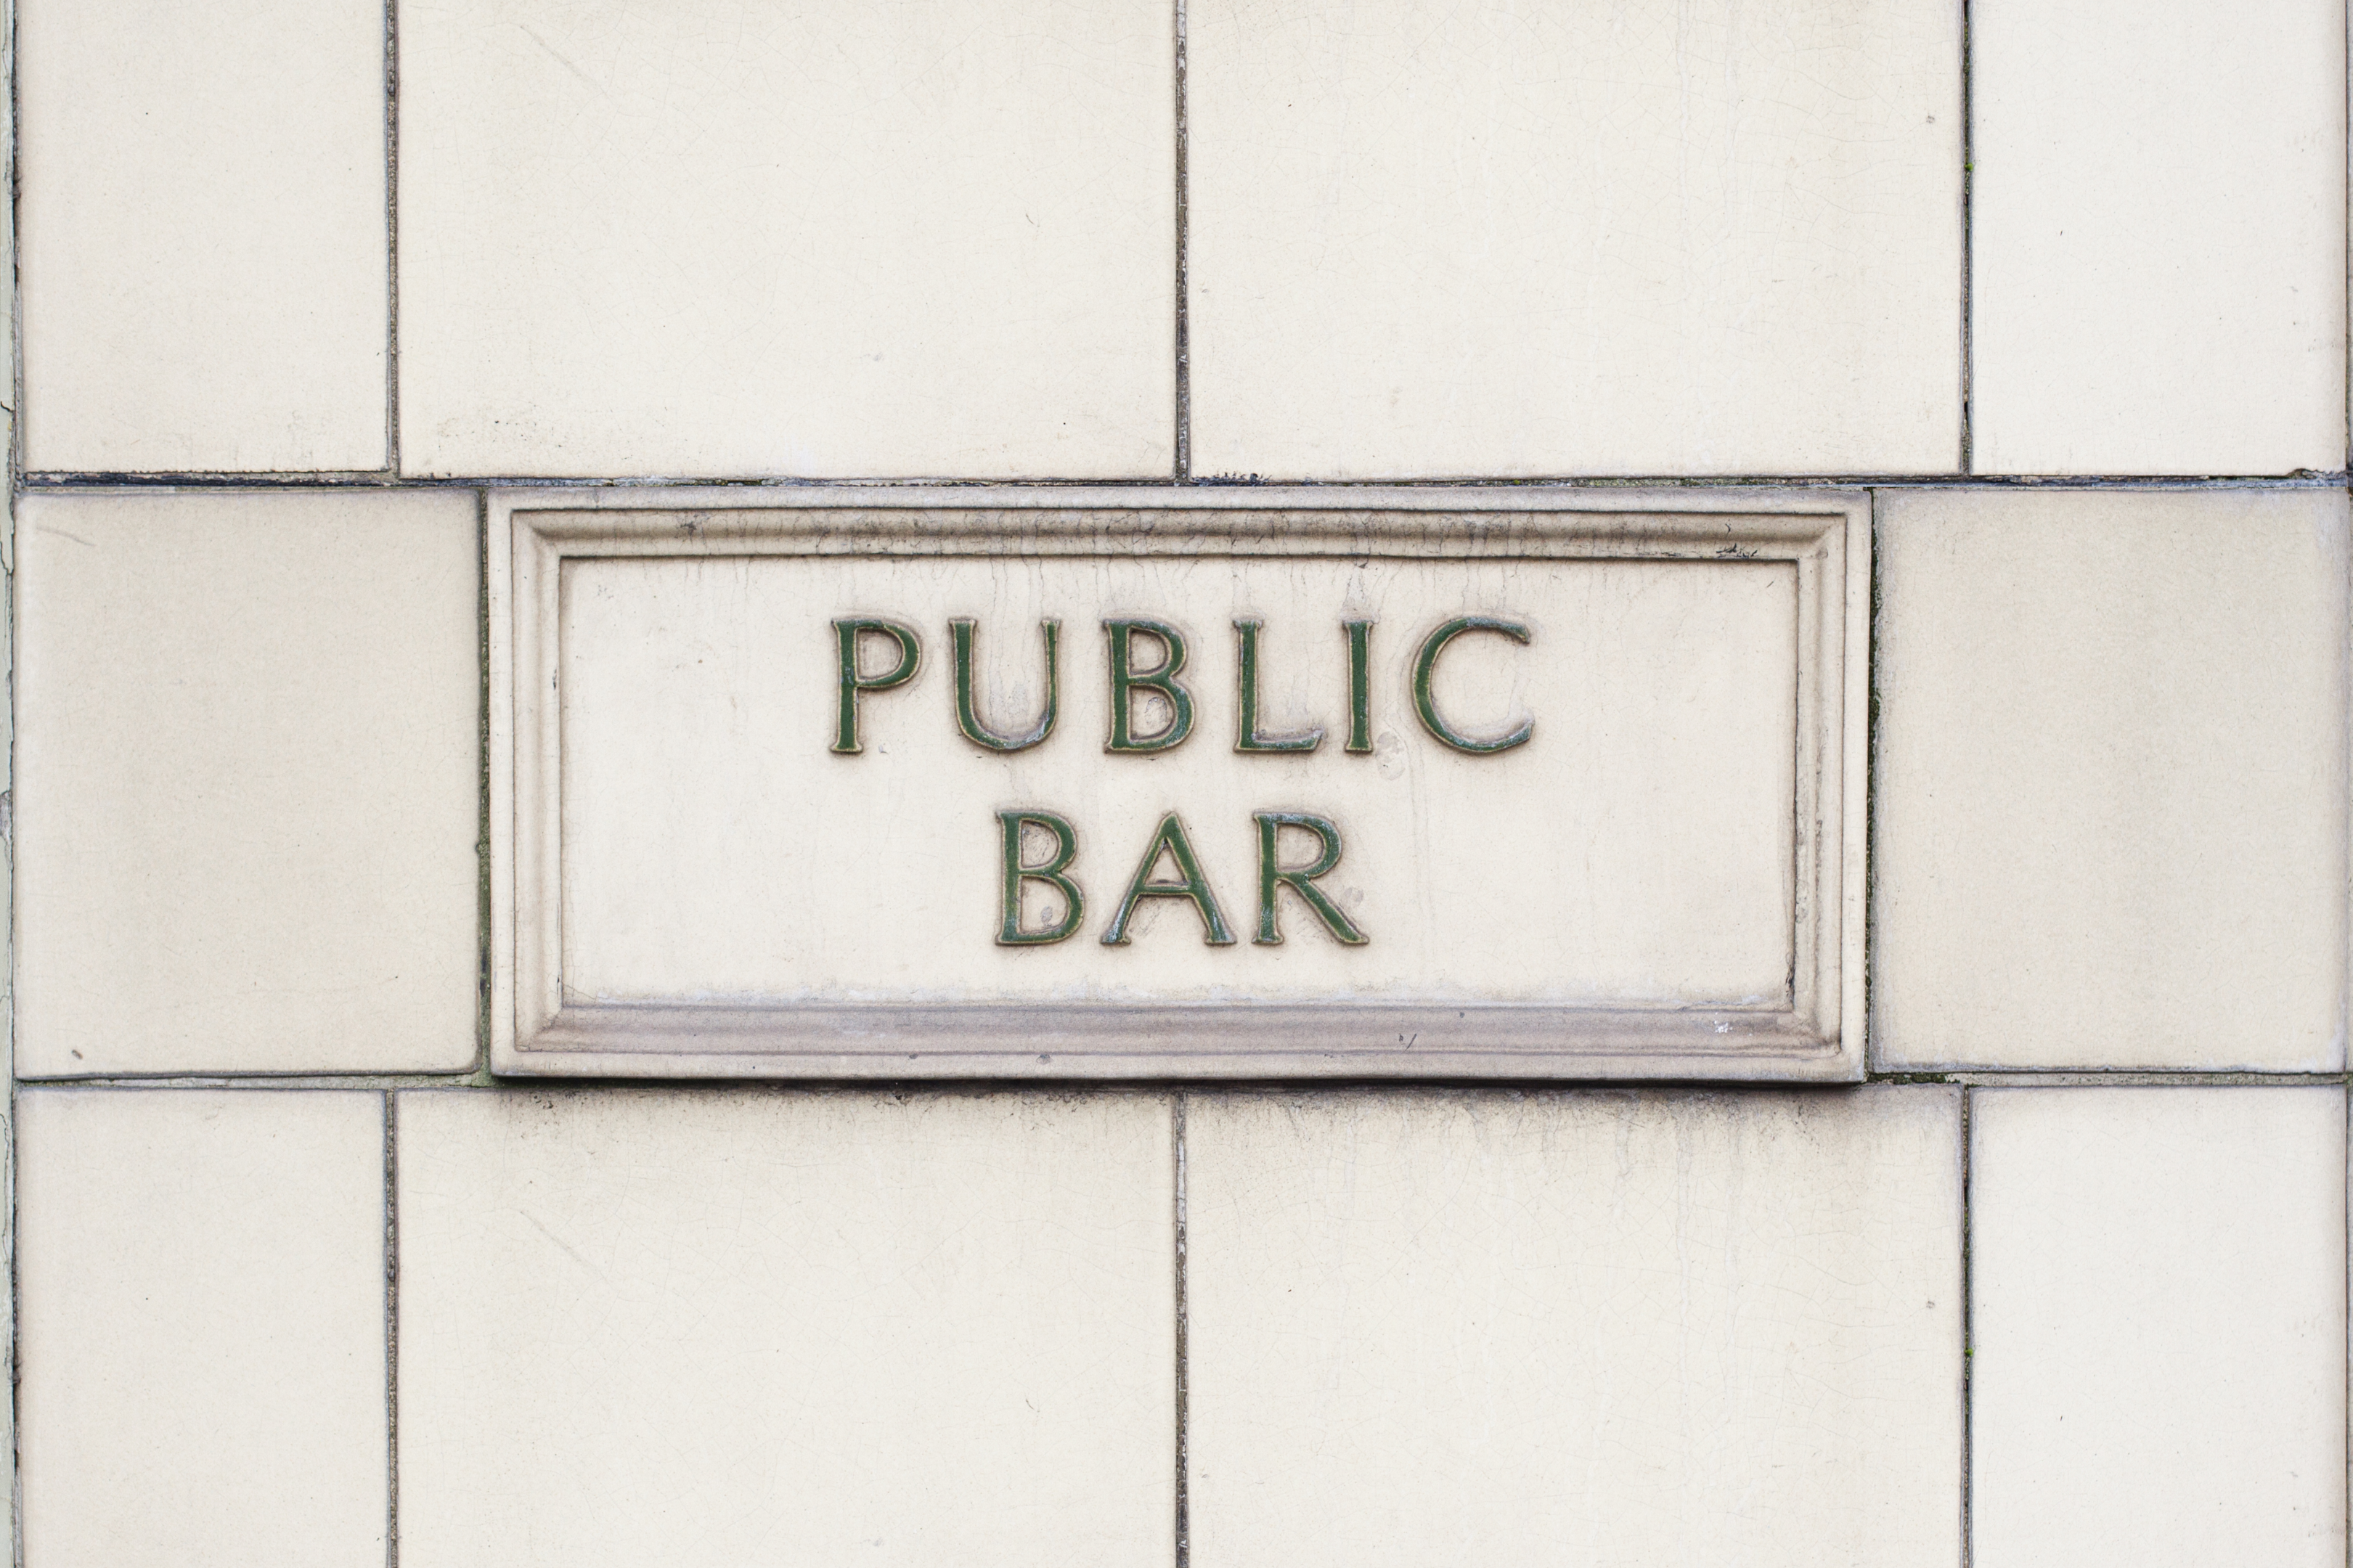 Traditional British pub sign displayed against a white brick wall.